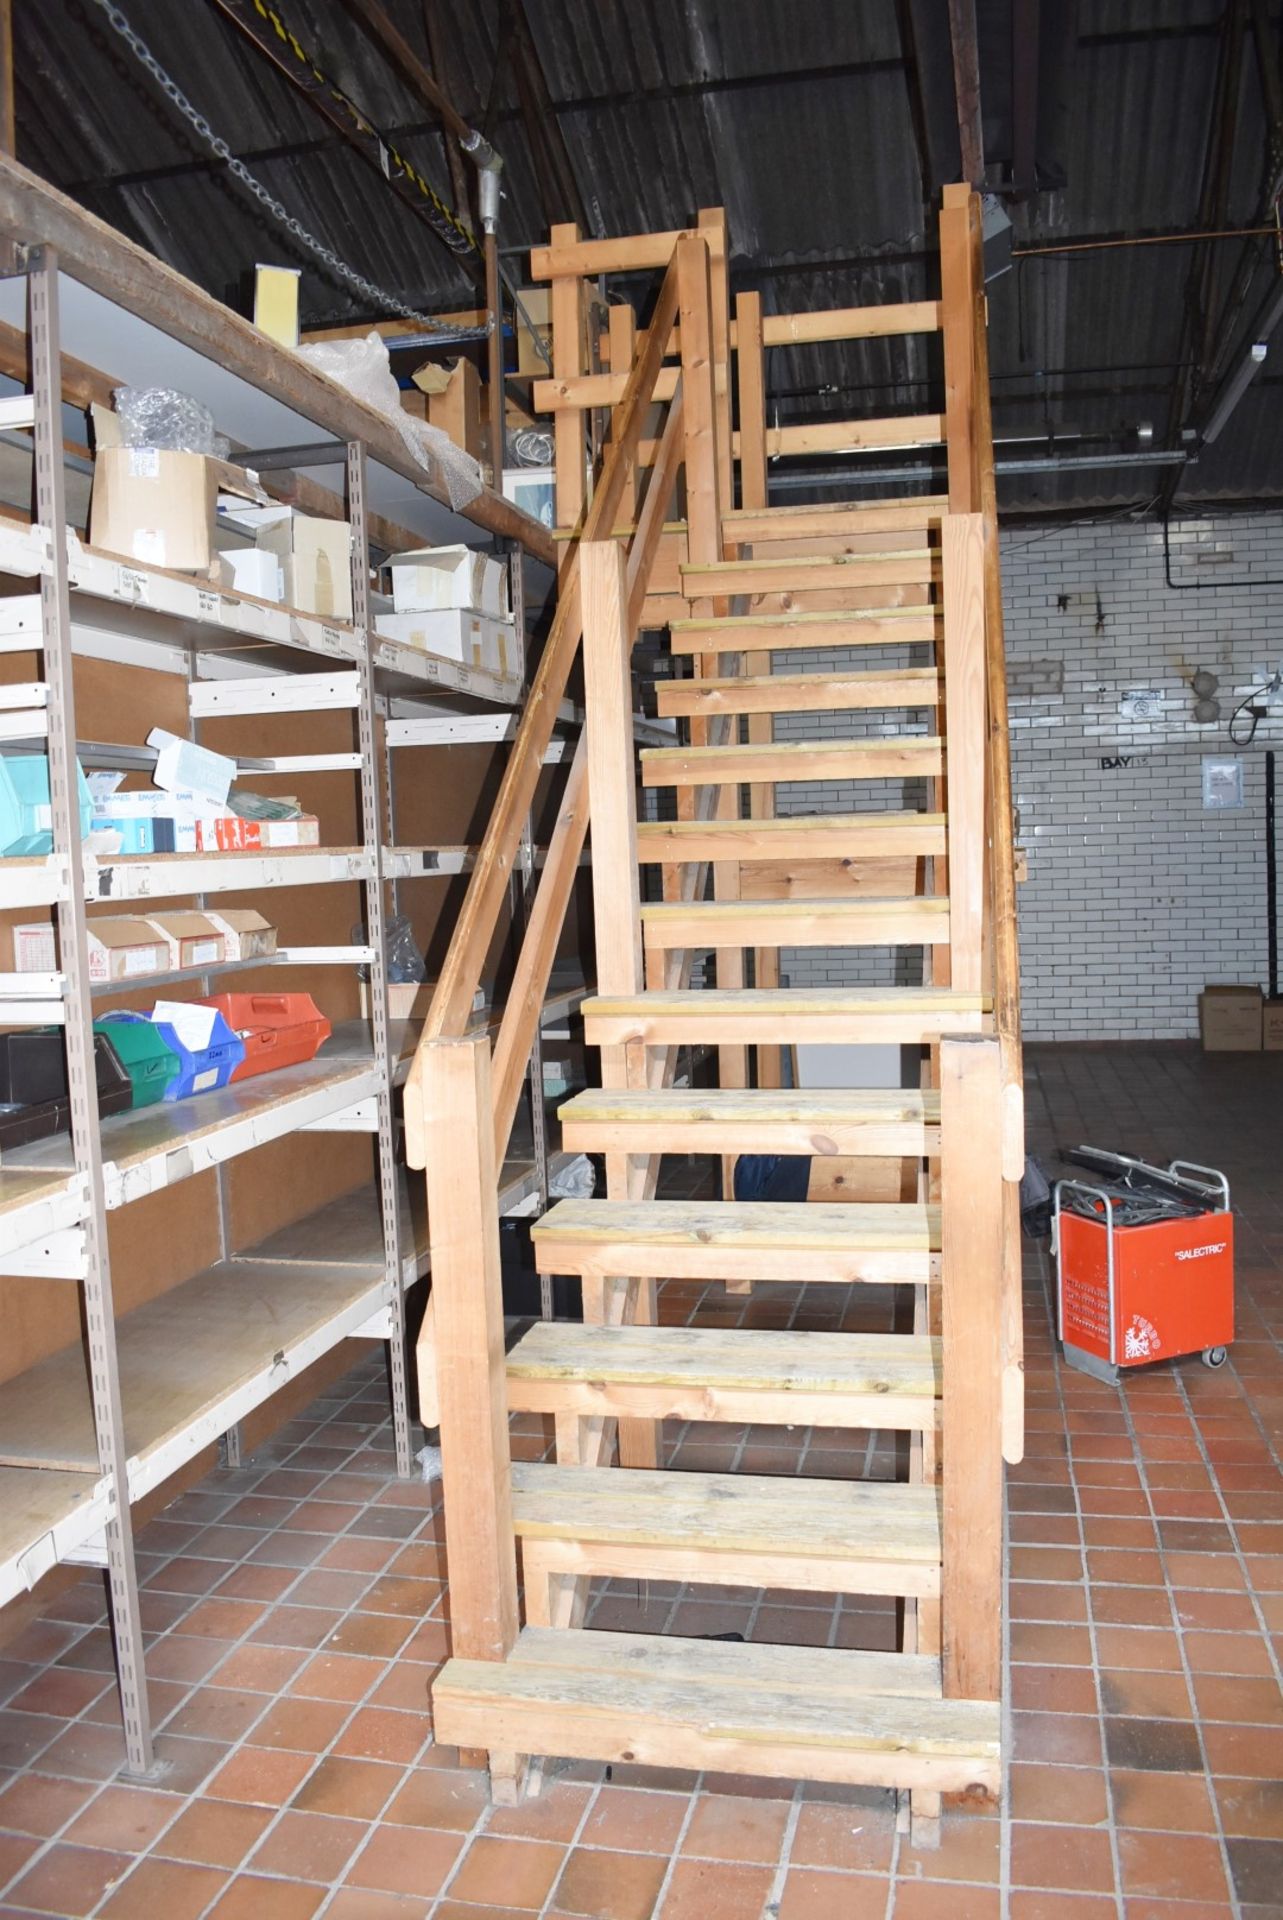 1 x Mezzanine Floor Over a Large Collection of Shelving With Timber Staircase - Size: 3m x 12m x 9m - Image 19 of 38